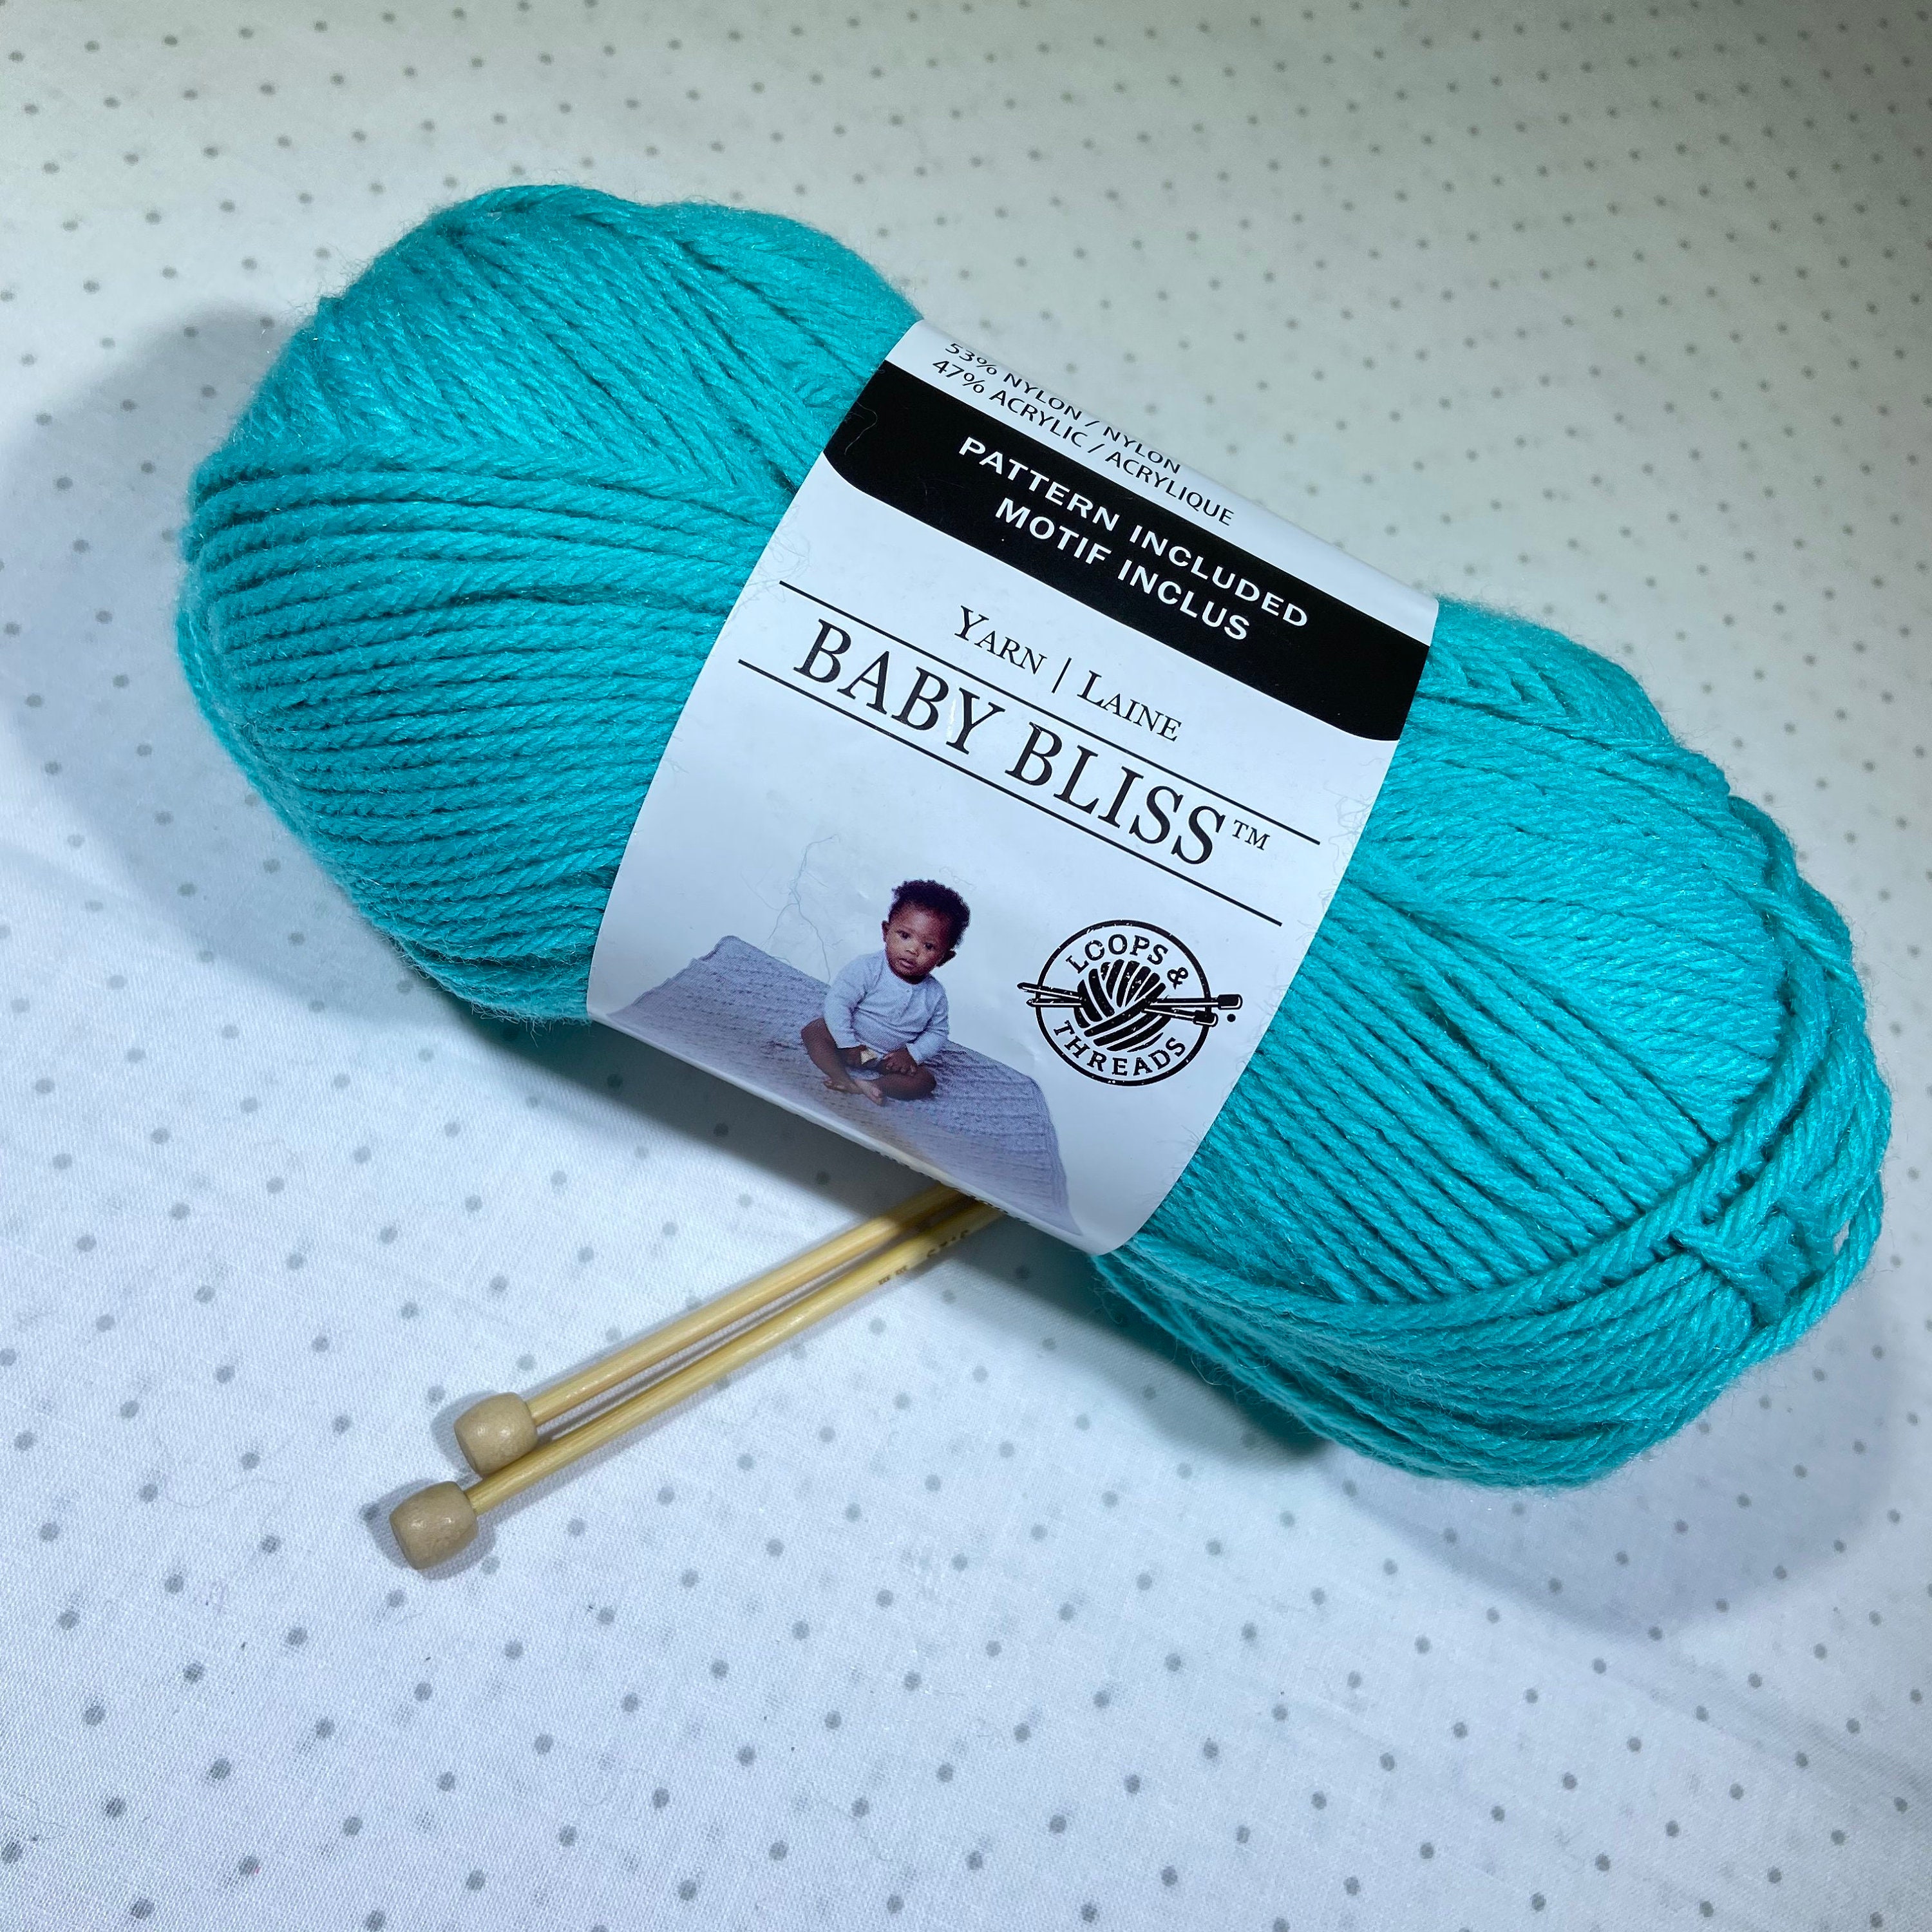 Clearance Yarn & Wool  Tracked and Express Delivery Options